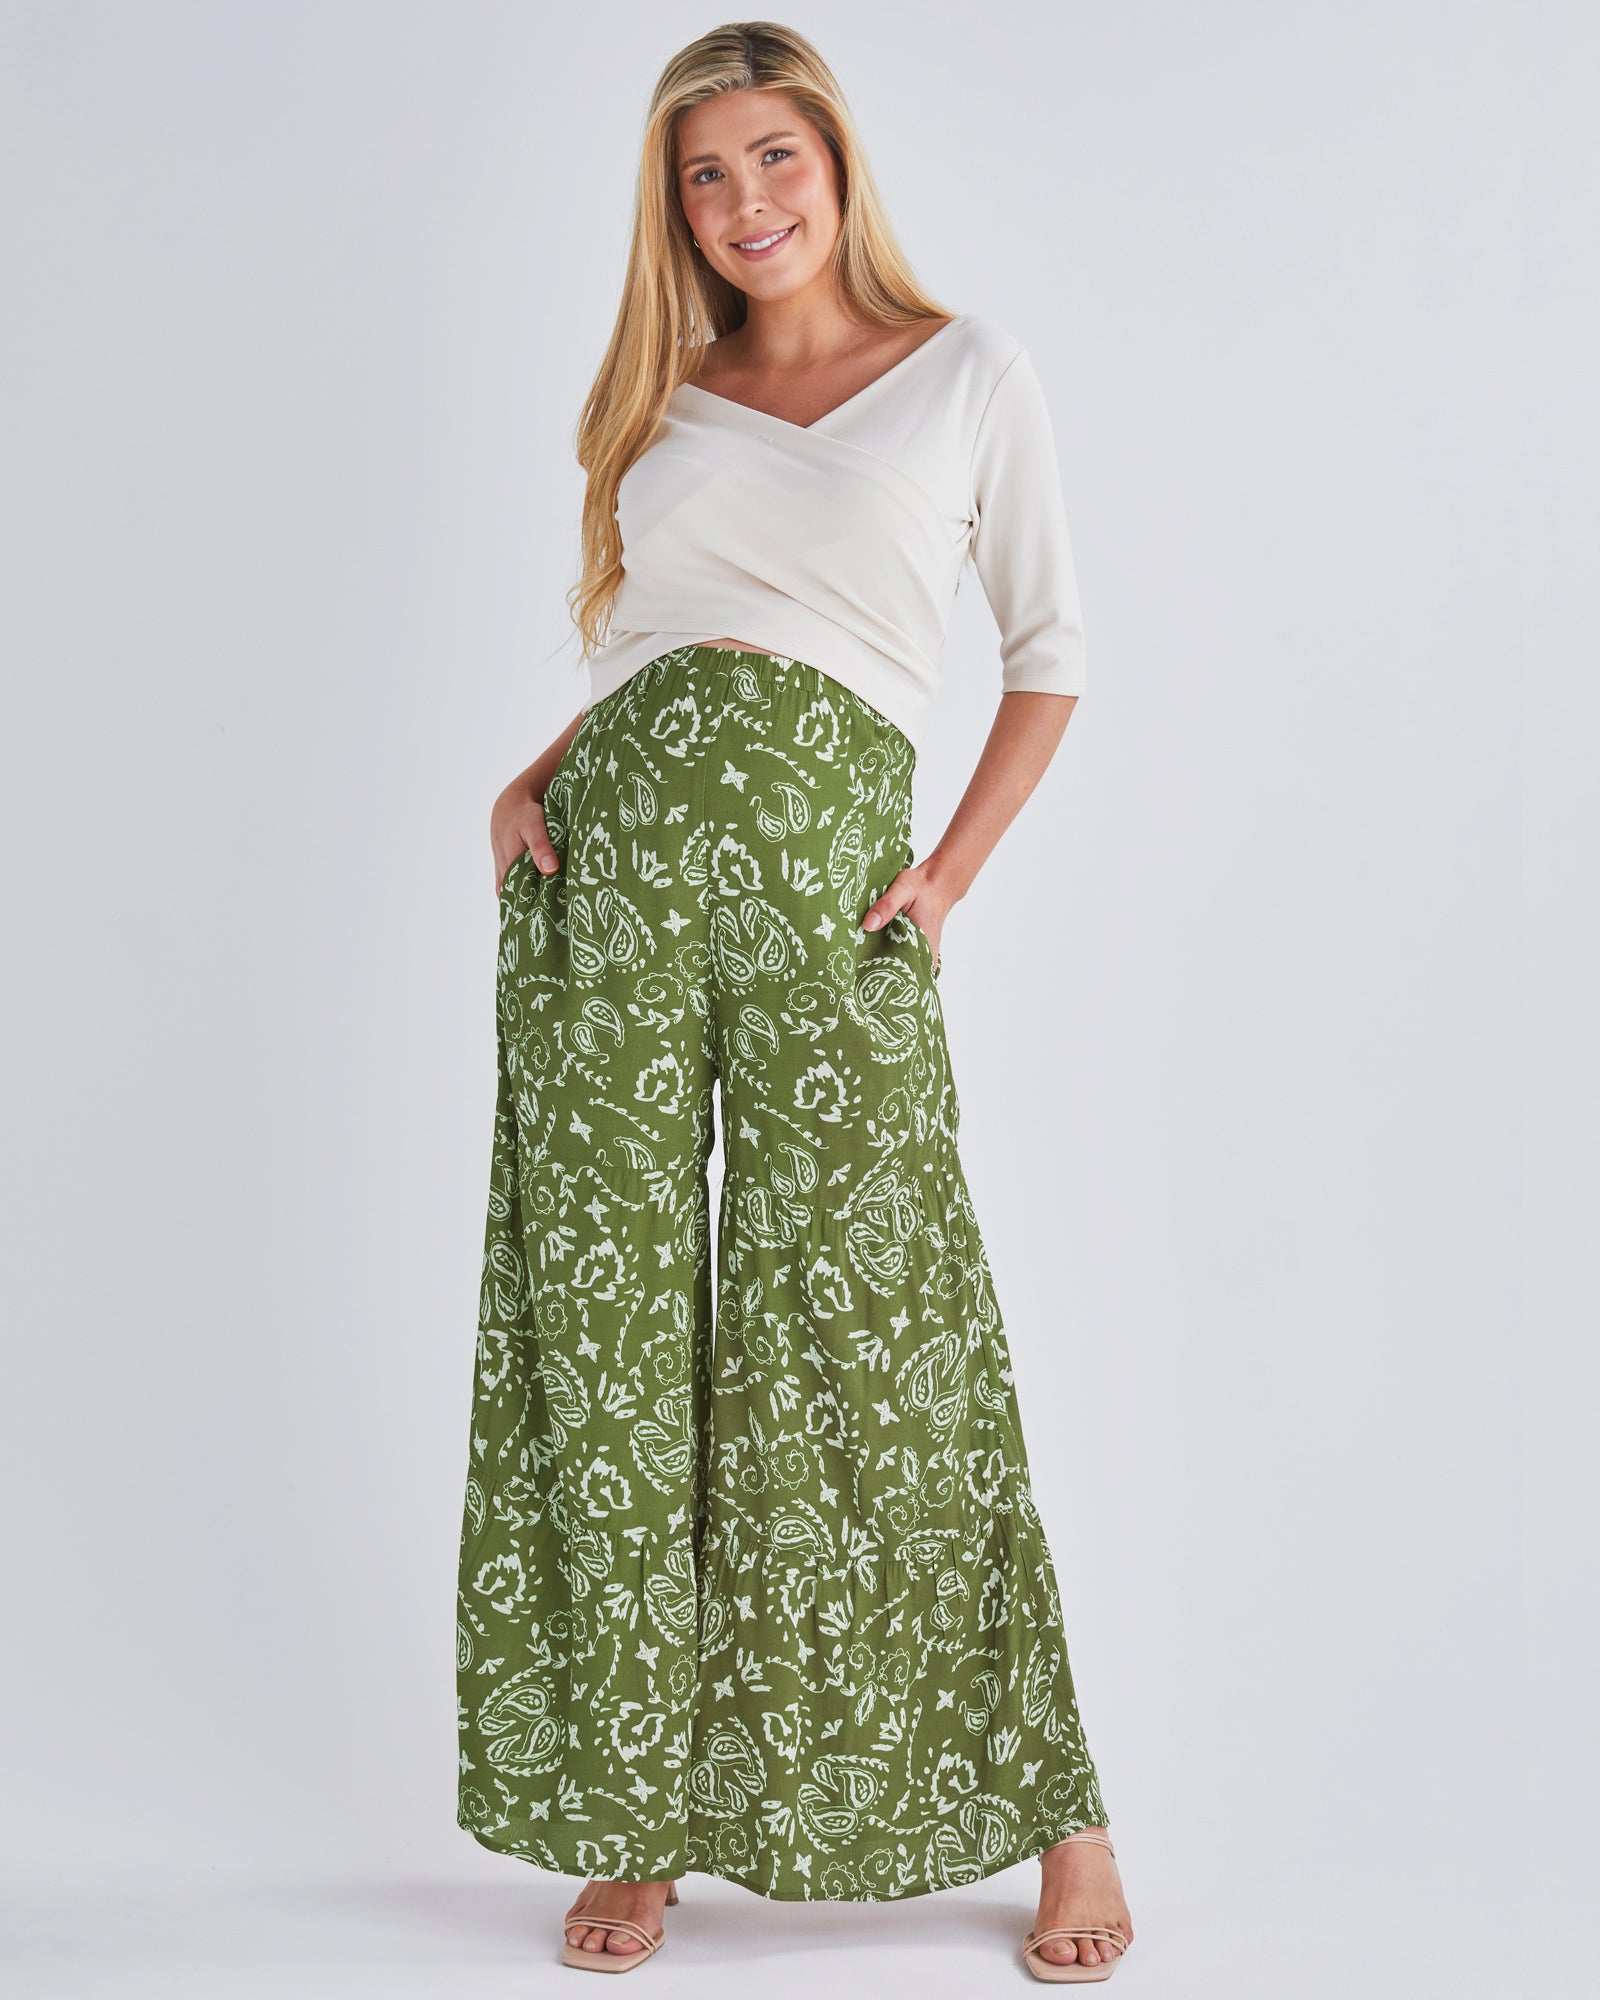 A pregnant Woman Wearing Stacie Wide Leg Khaki Maternity Pants in Paisley Print from Angel Maternity